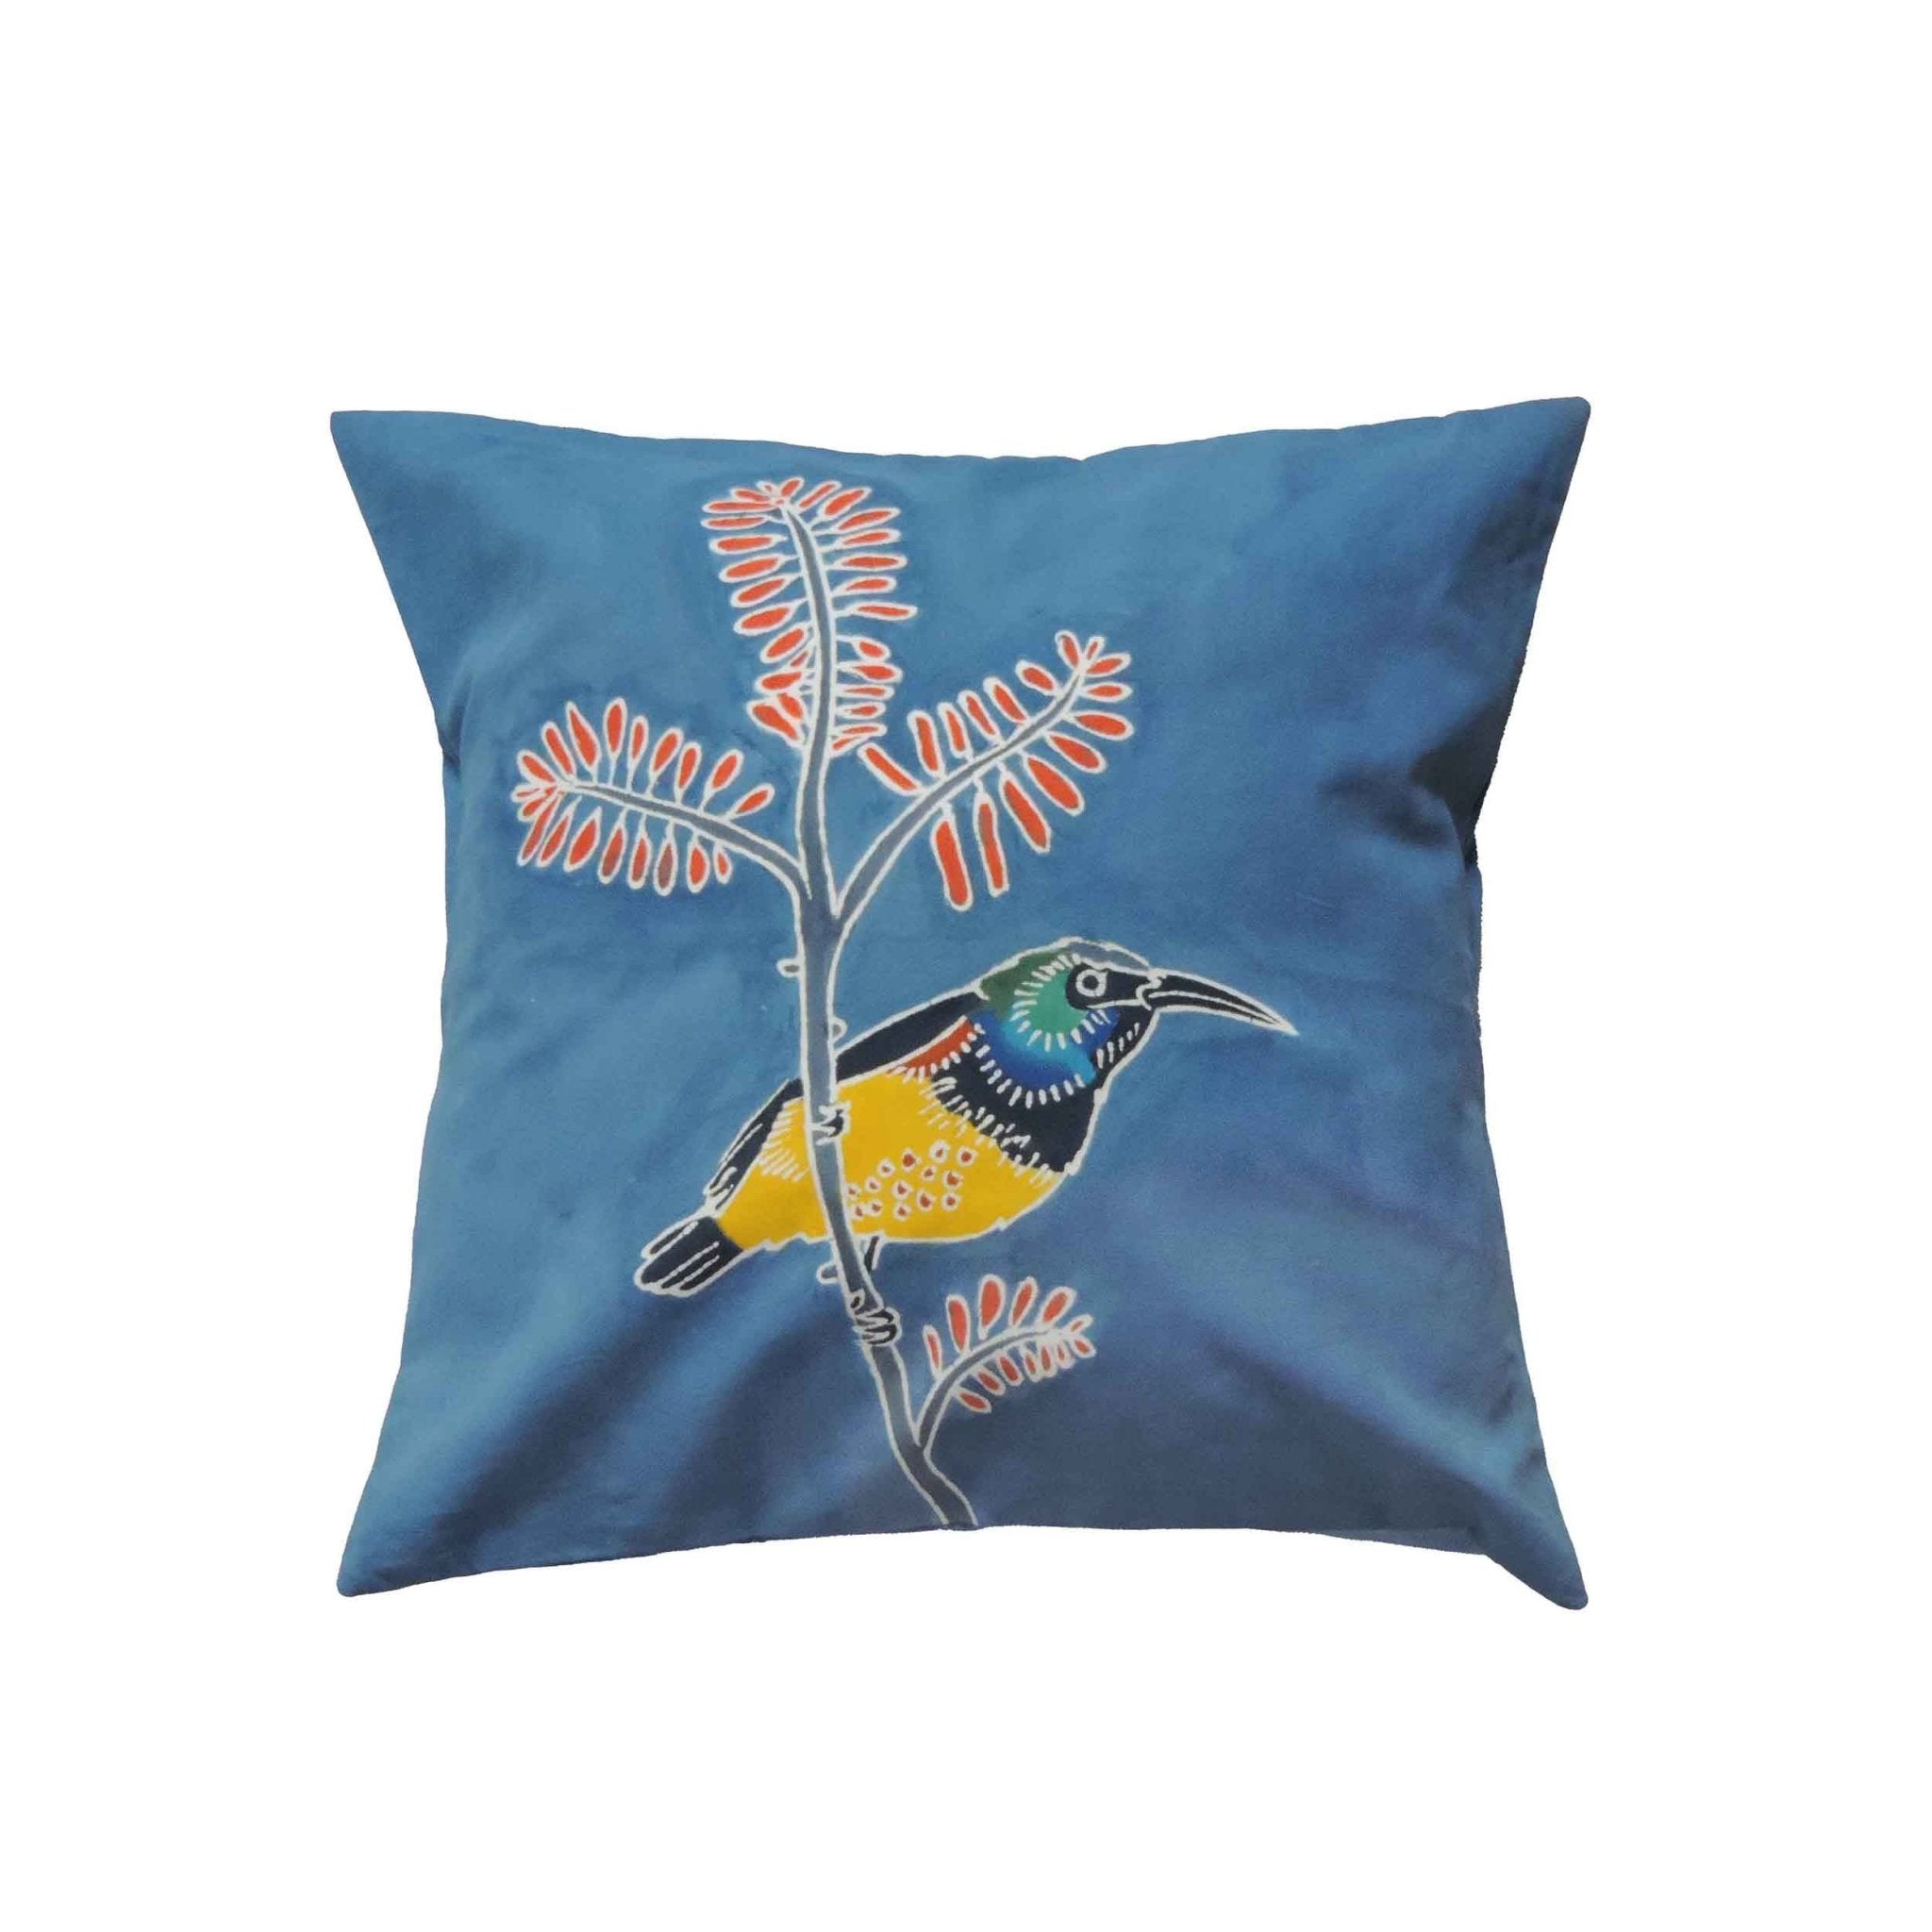 Papiko Sunbird Cushion Cover - Handmade by TRIBAL TEXTILES - Handcrafted Home Decor Interiors - African Made